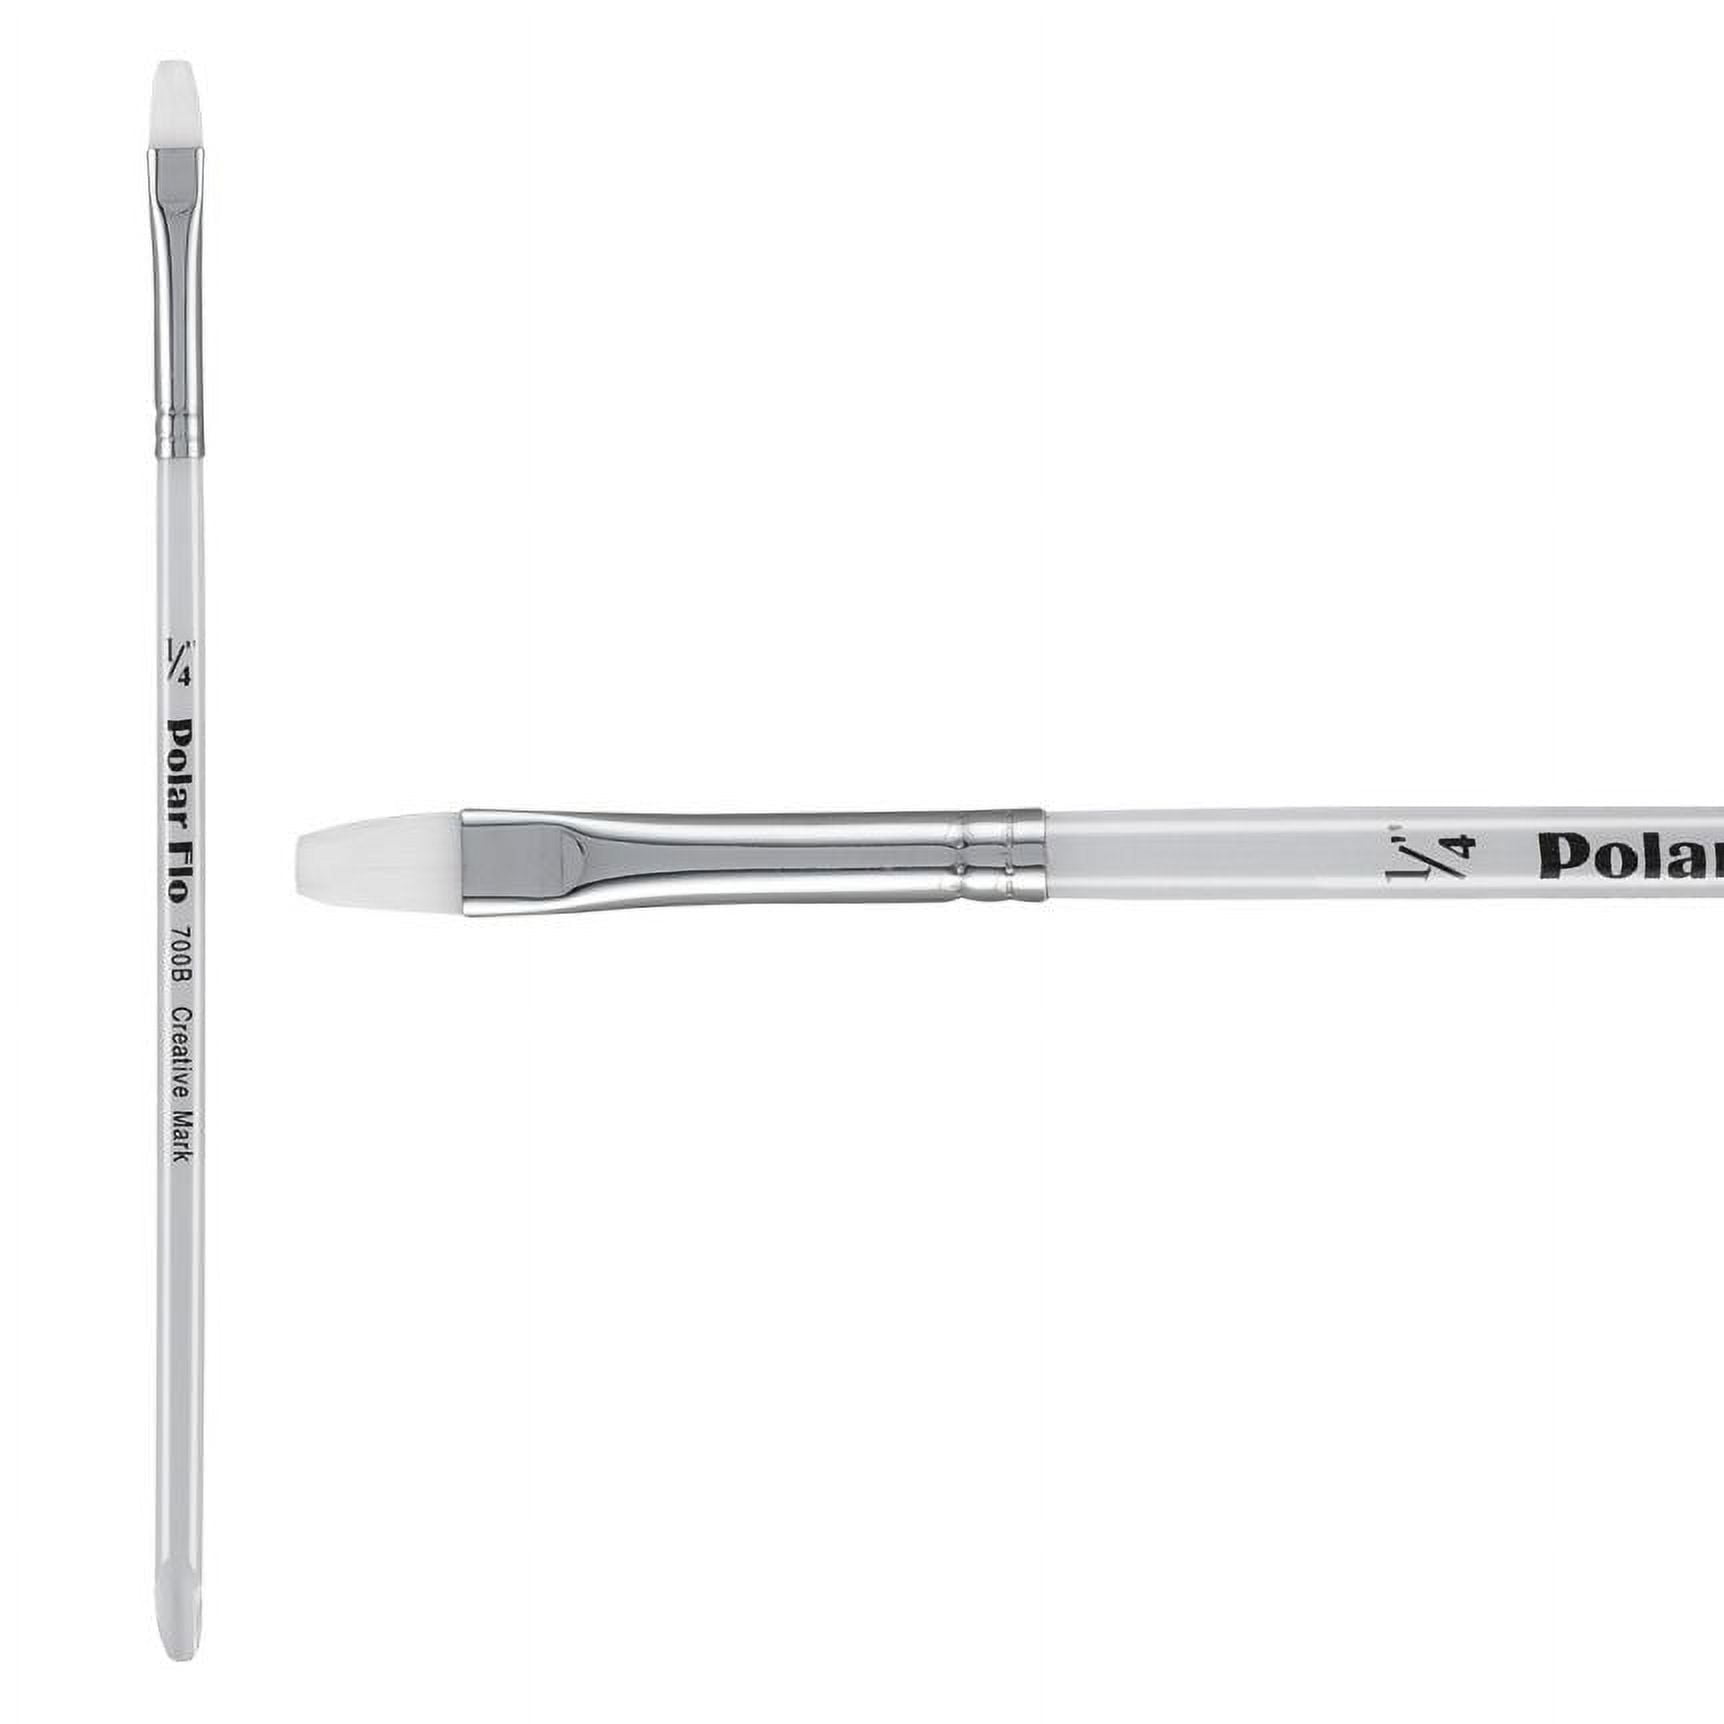 Creative Mark Polar Flo, Try It Pack of 2 Watercolor Brushes